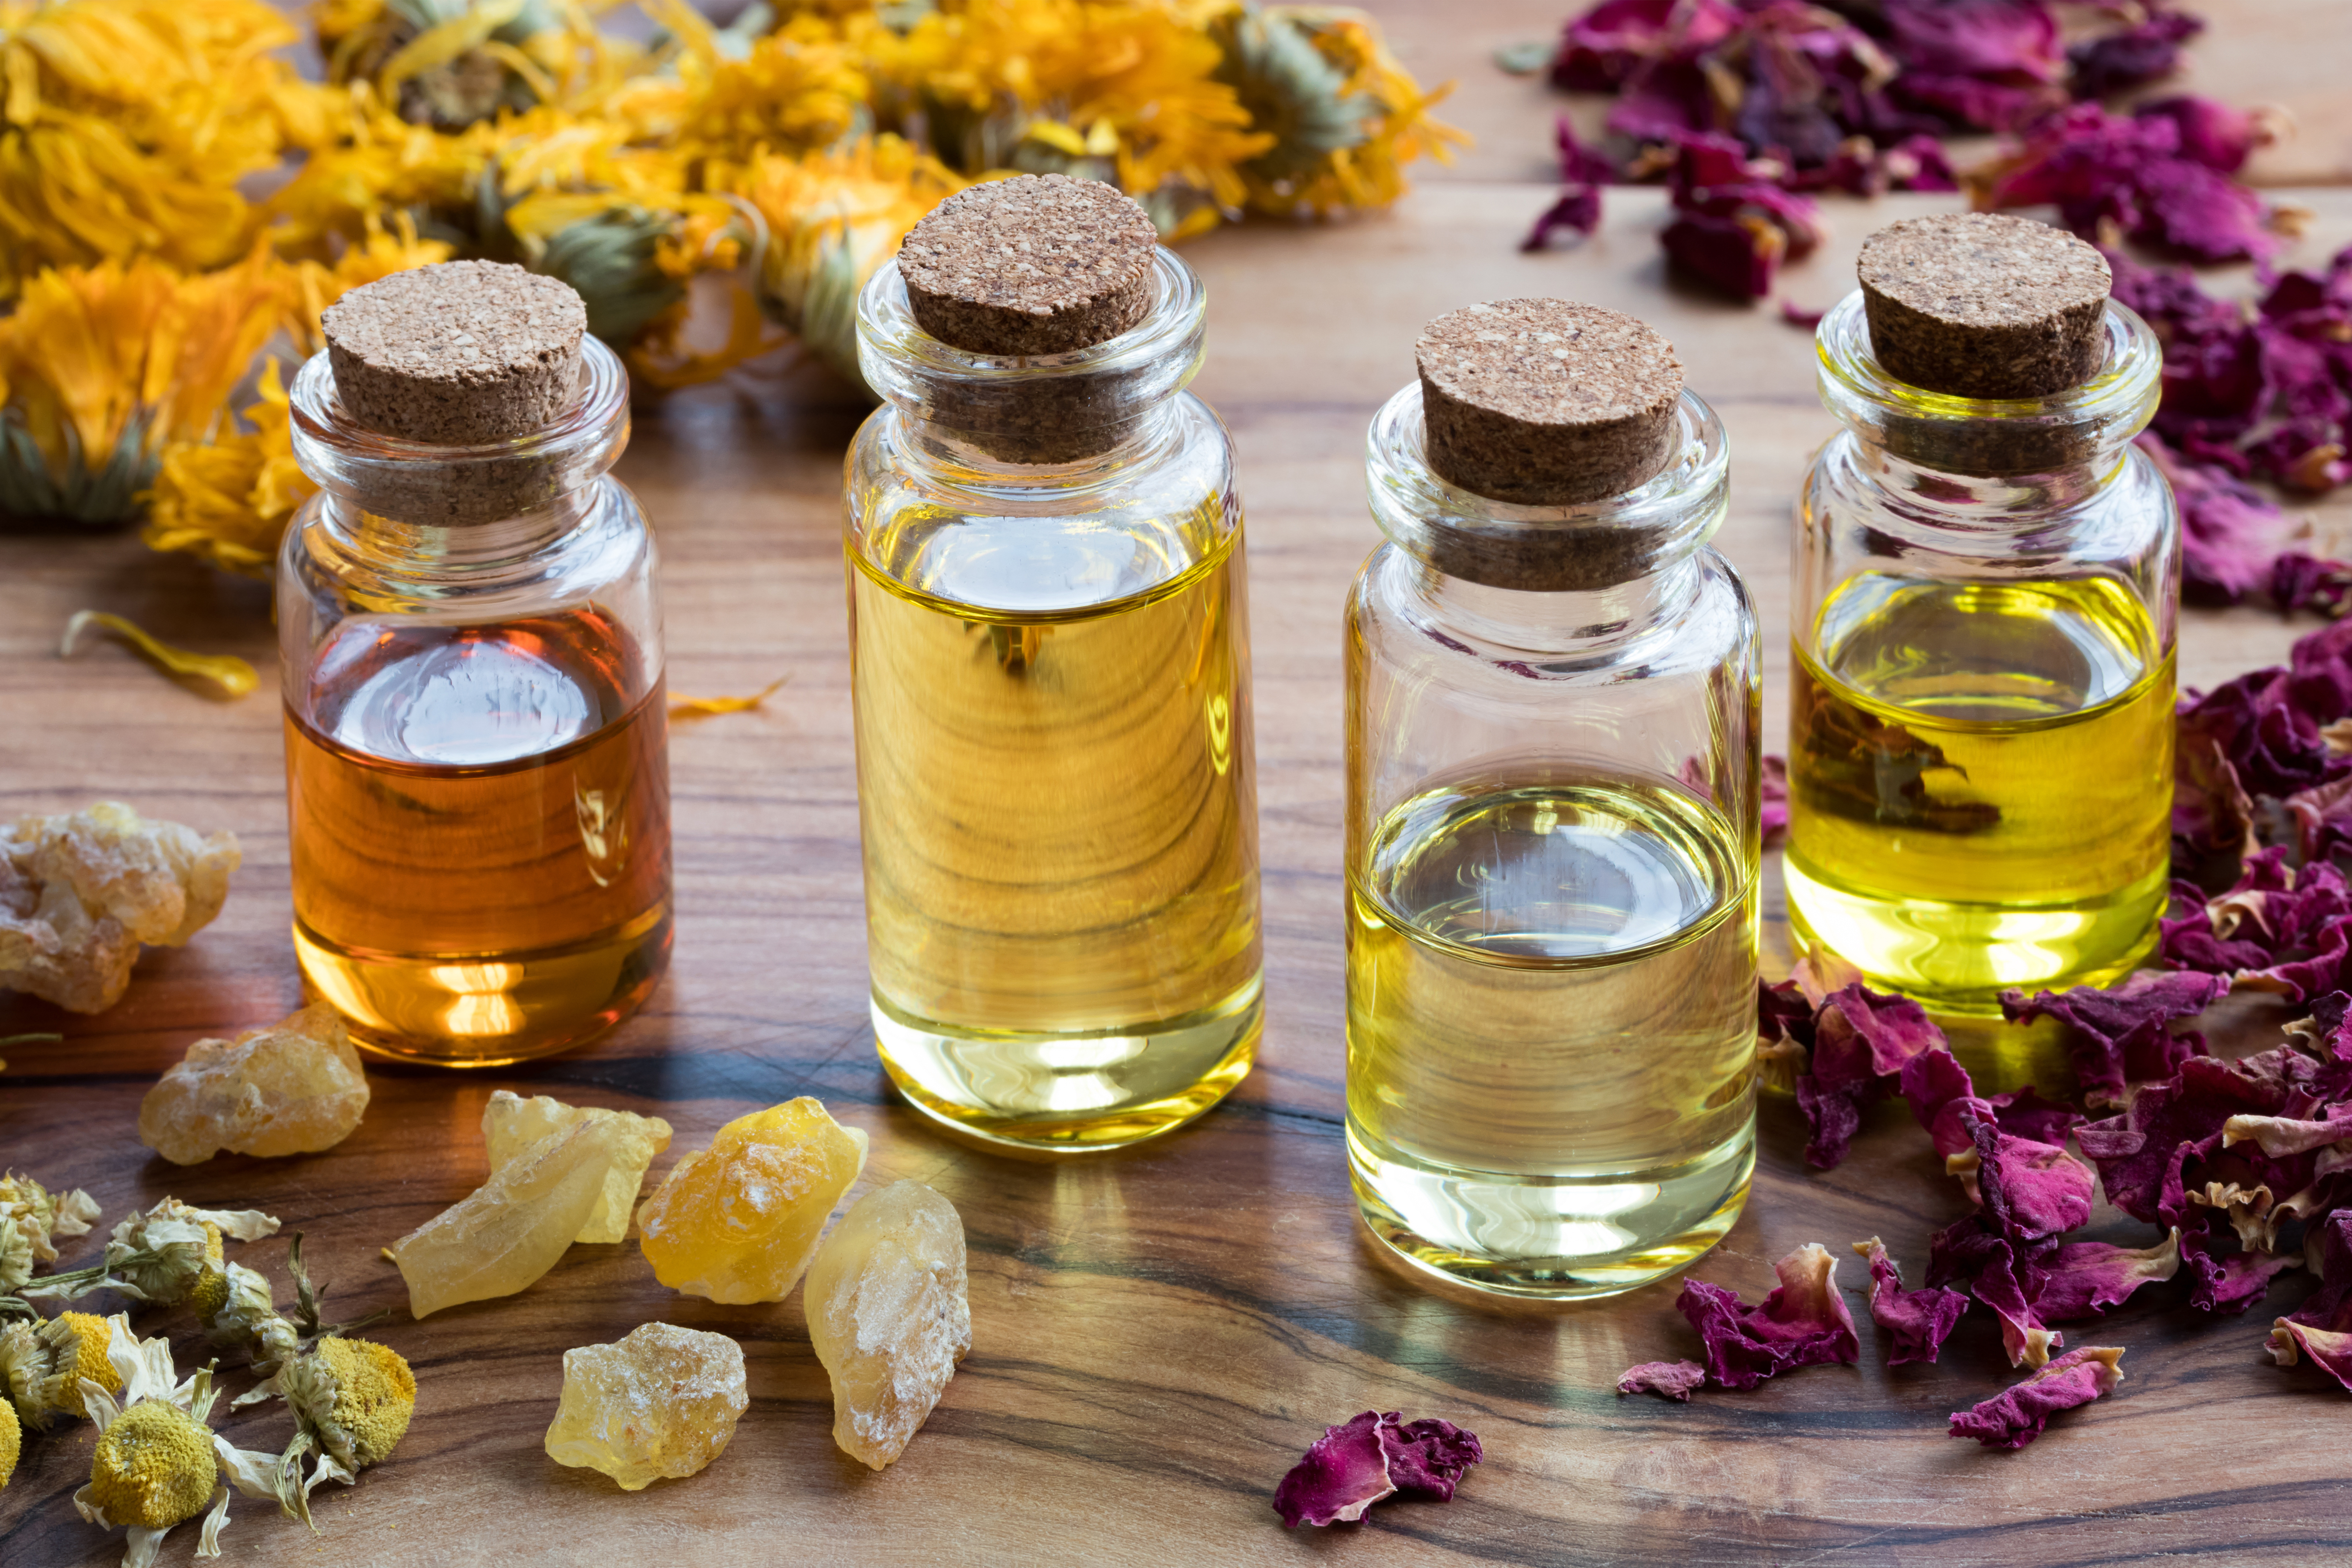 How to Make Fragrance Oil With DPG